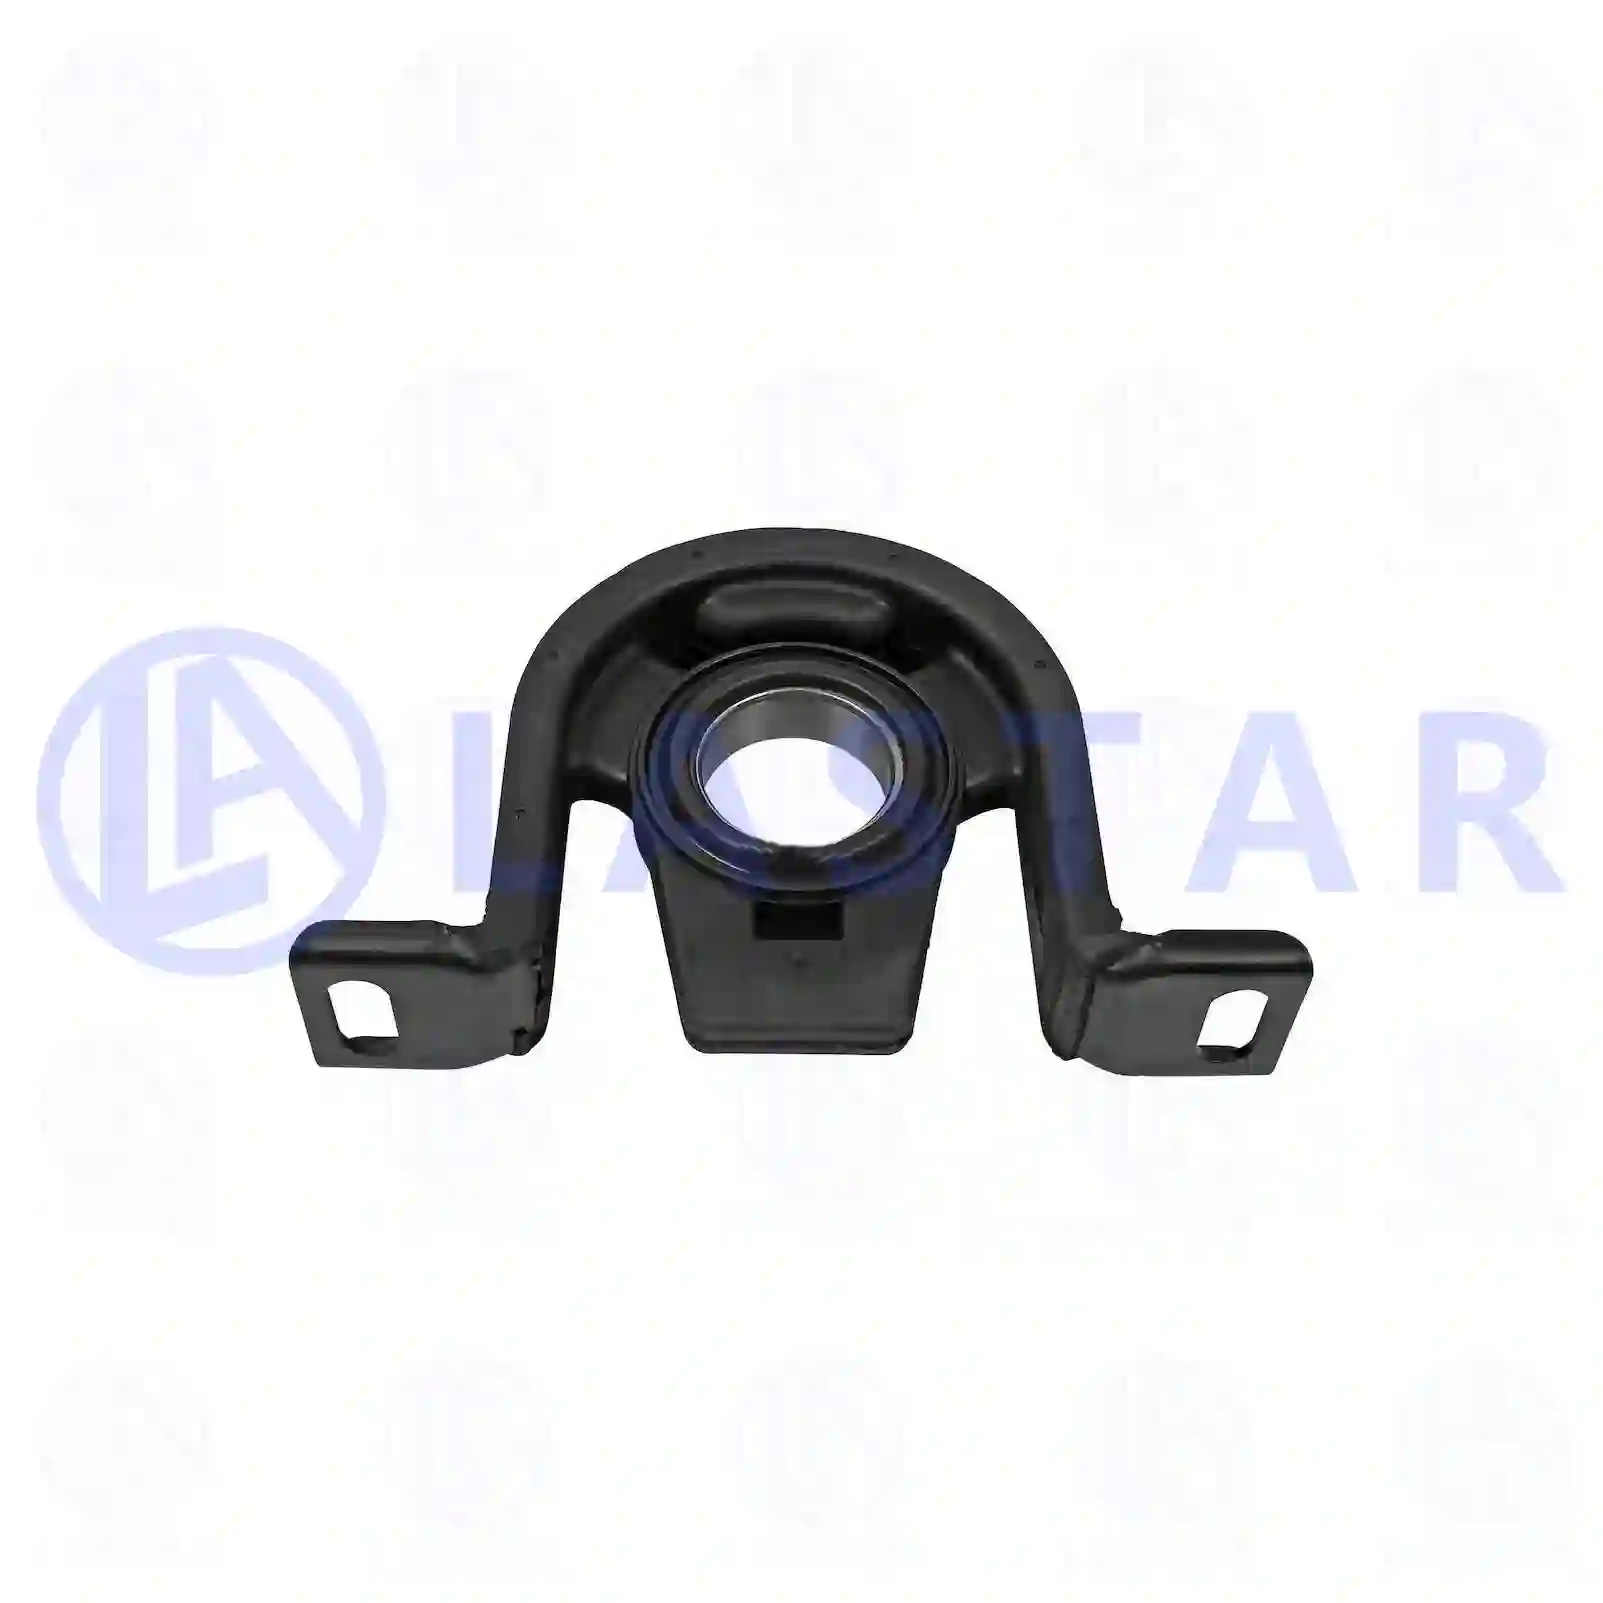 Center bearing, 77734270, 9014110312, 9014110412, 2D0521351 ||  77734270 Lastar Spare Part | Truck Spare Parts, Auotomotive Spare Parts Center bearing, 77734270, 9014110312, 9014110412, 2D0521351 ||  77734270 Lastar Spare Part | Truck Spare Parts, Auotomotive Spare Parts